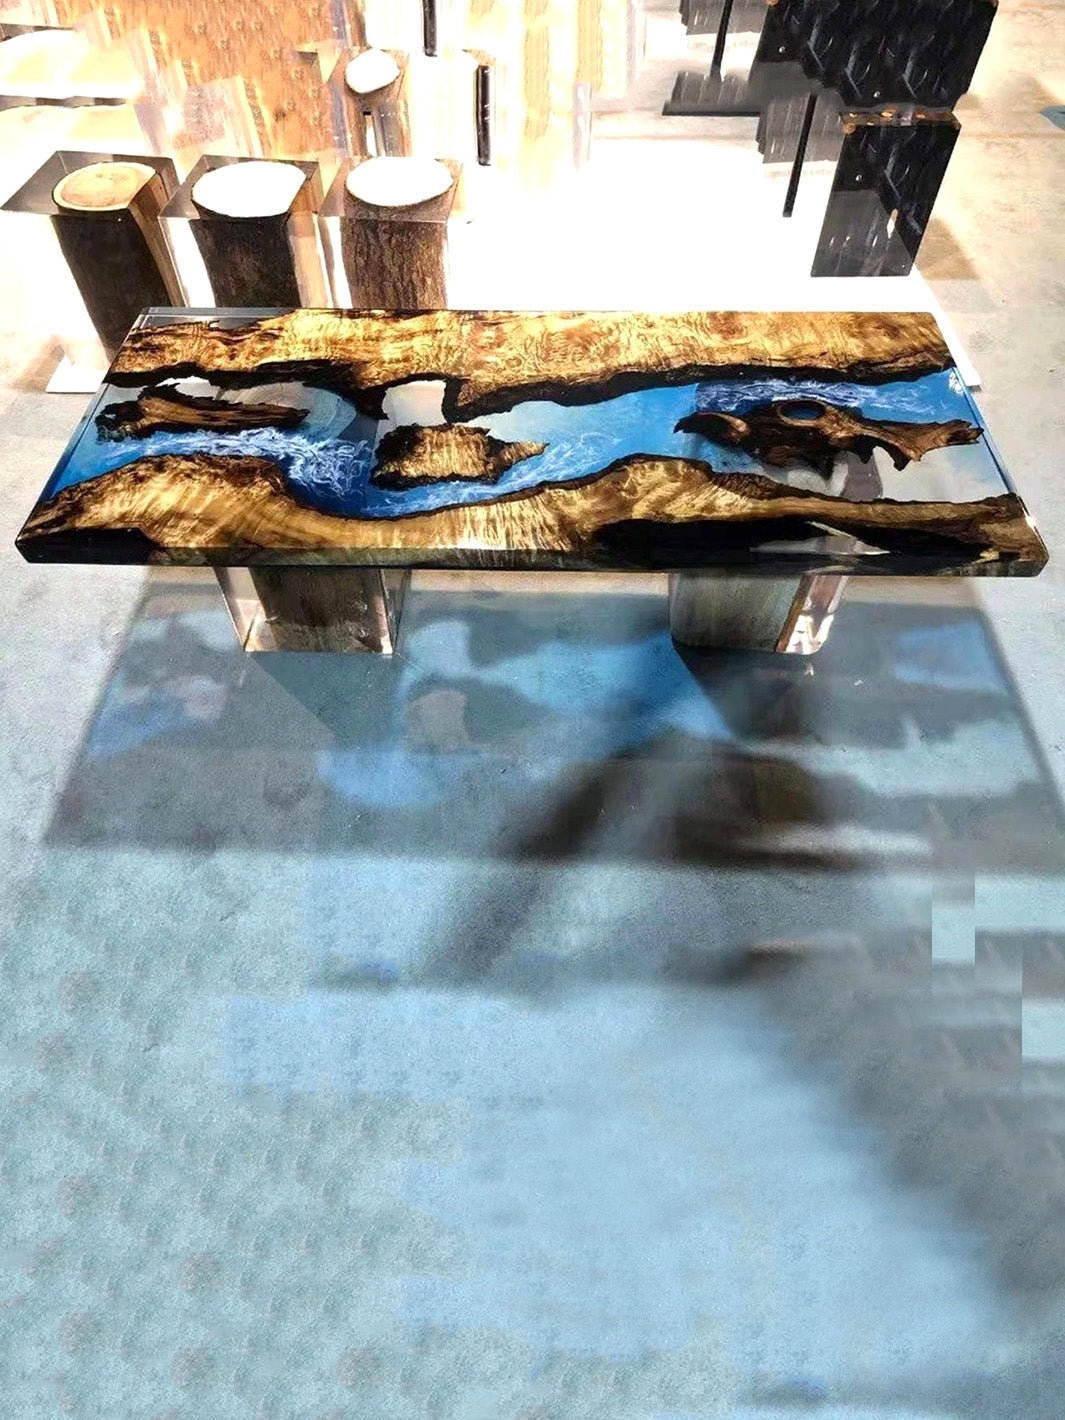 Handcrafted River Beach Epoxy Resin Wooden Coffee Table| 150x60cm Made 4 Decor Tables MDR0015-6